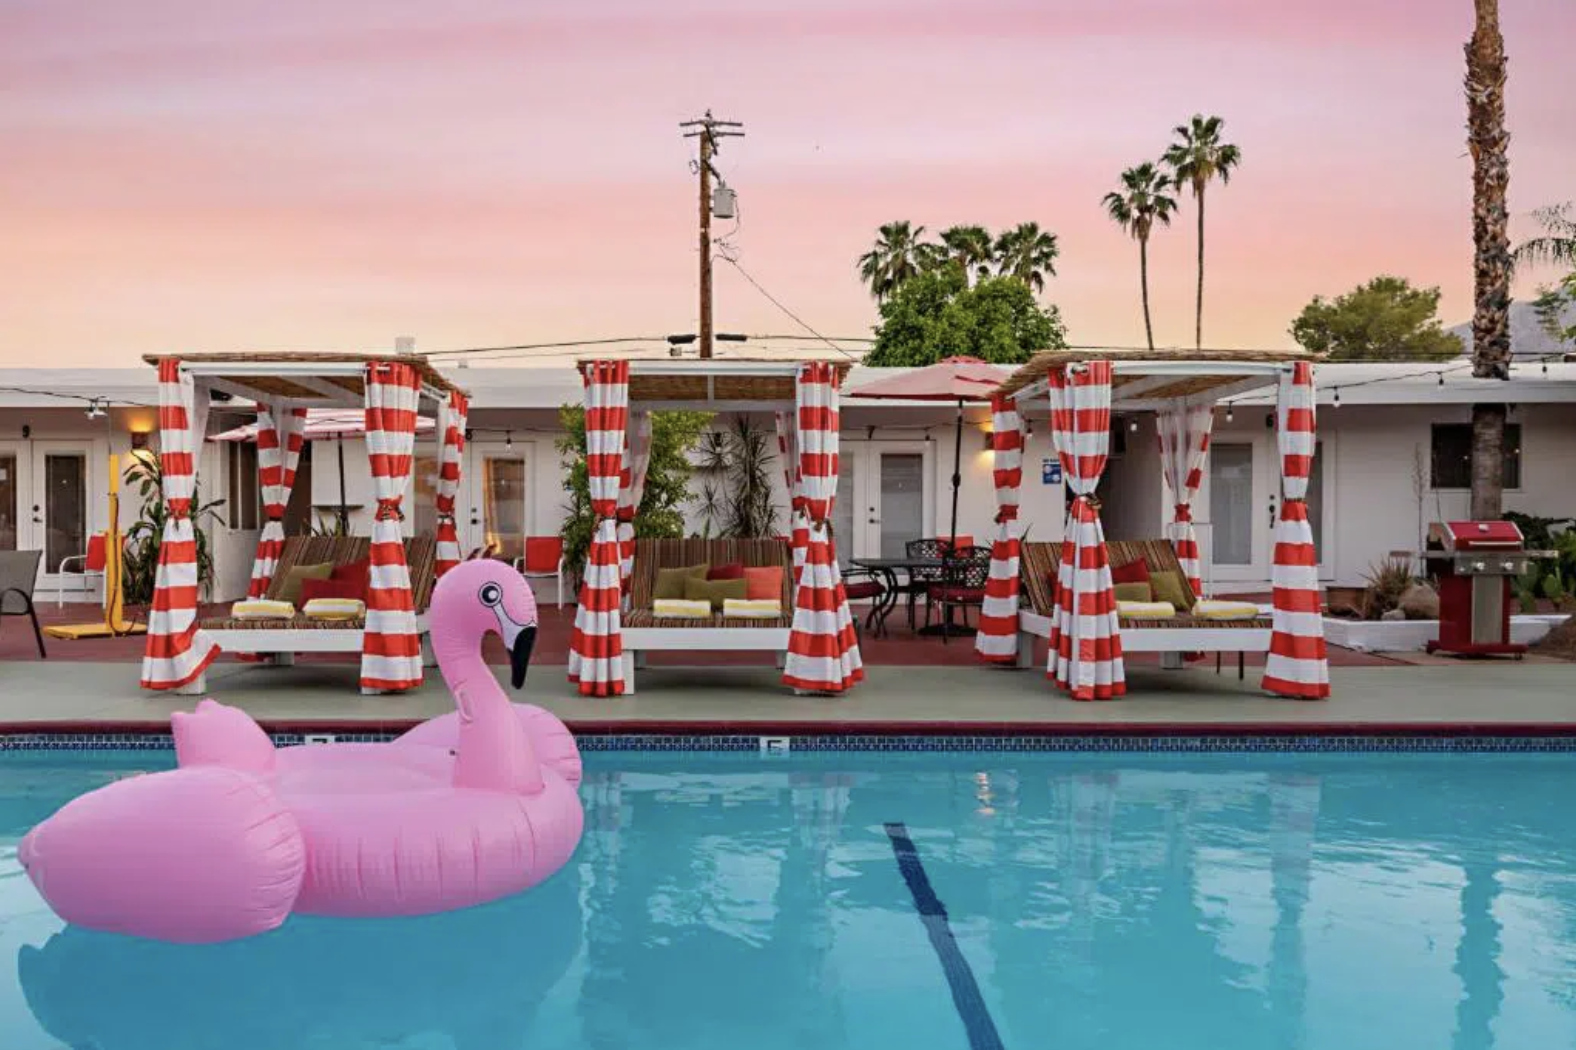 What's New In Palm Springs - Float